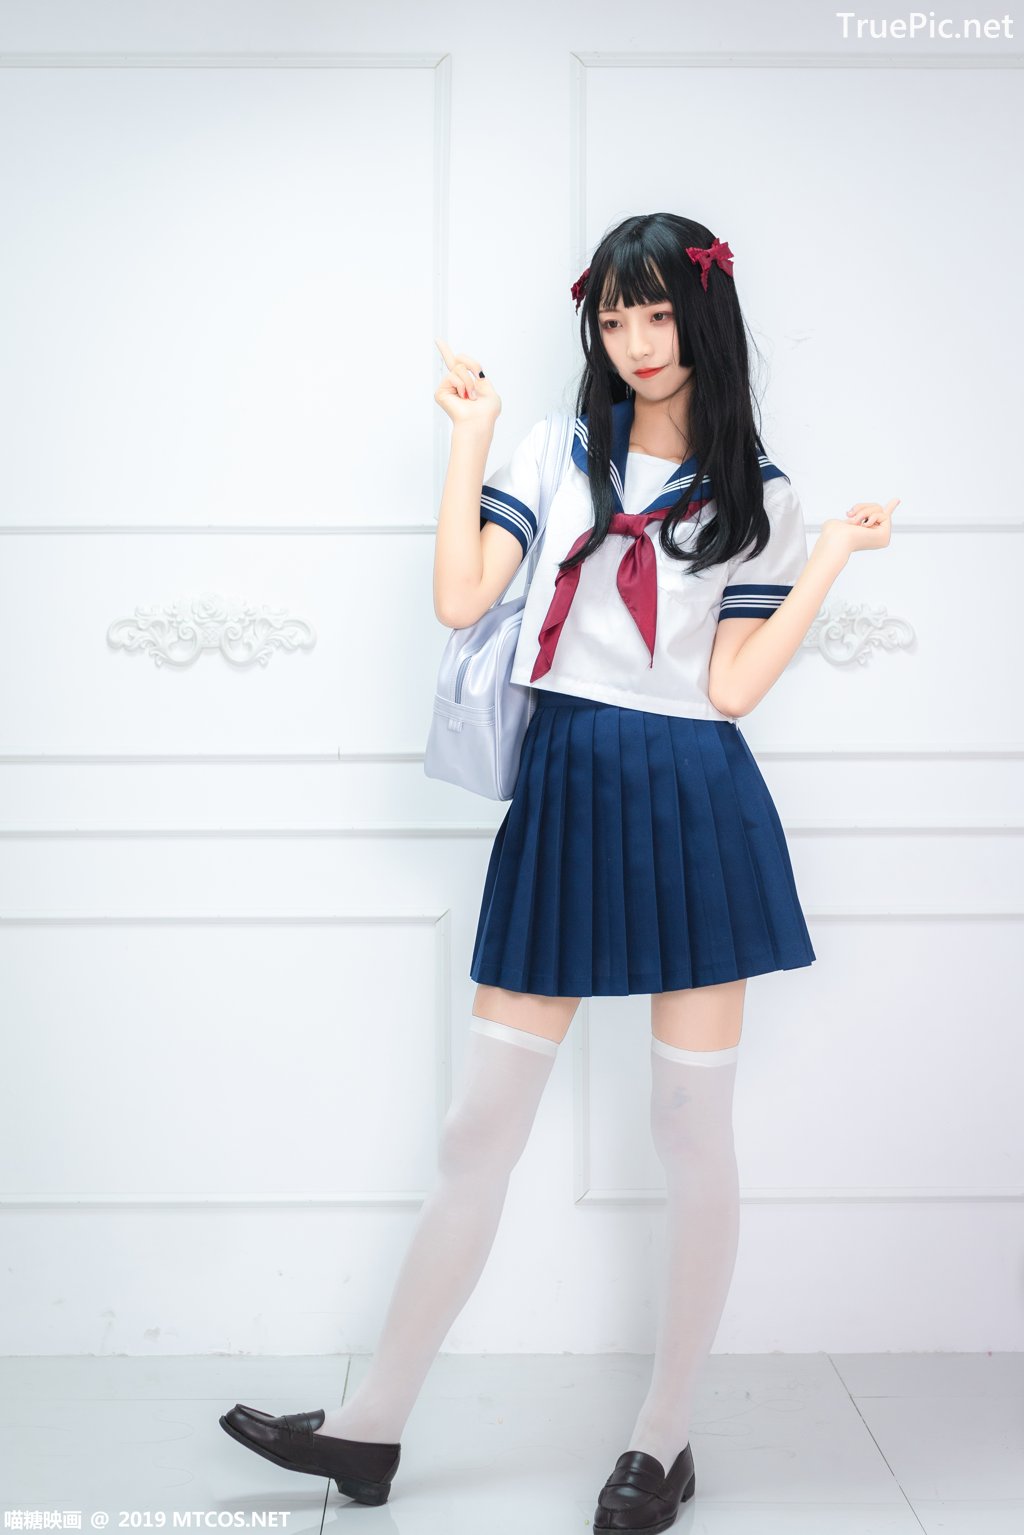 Image-MTCos-喵糖映画-Vol-012–Chinese-Pretty-Model-Cute-School-Girl-With-Sailor-Dress-TruePic.net- Picture-20